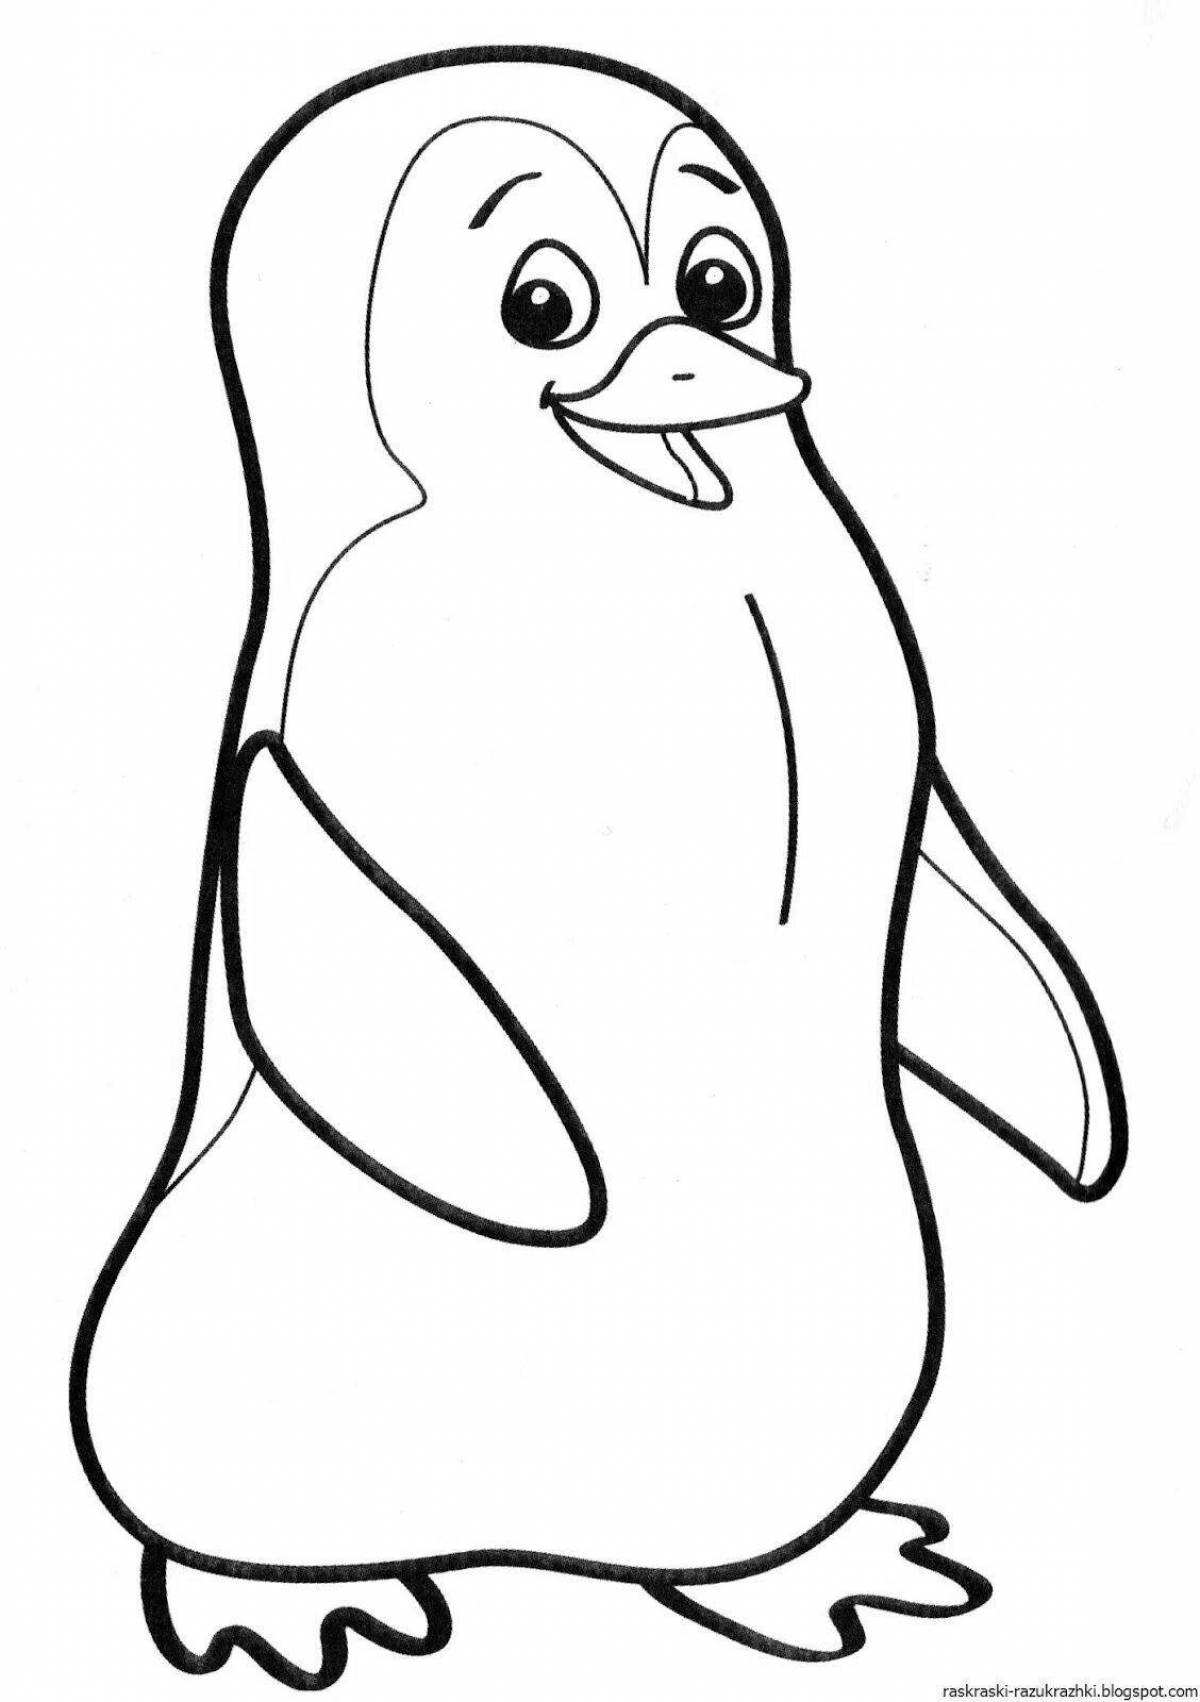 Creative penguin drawing for kids